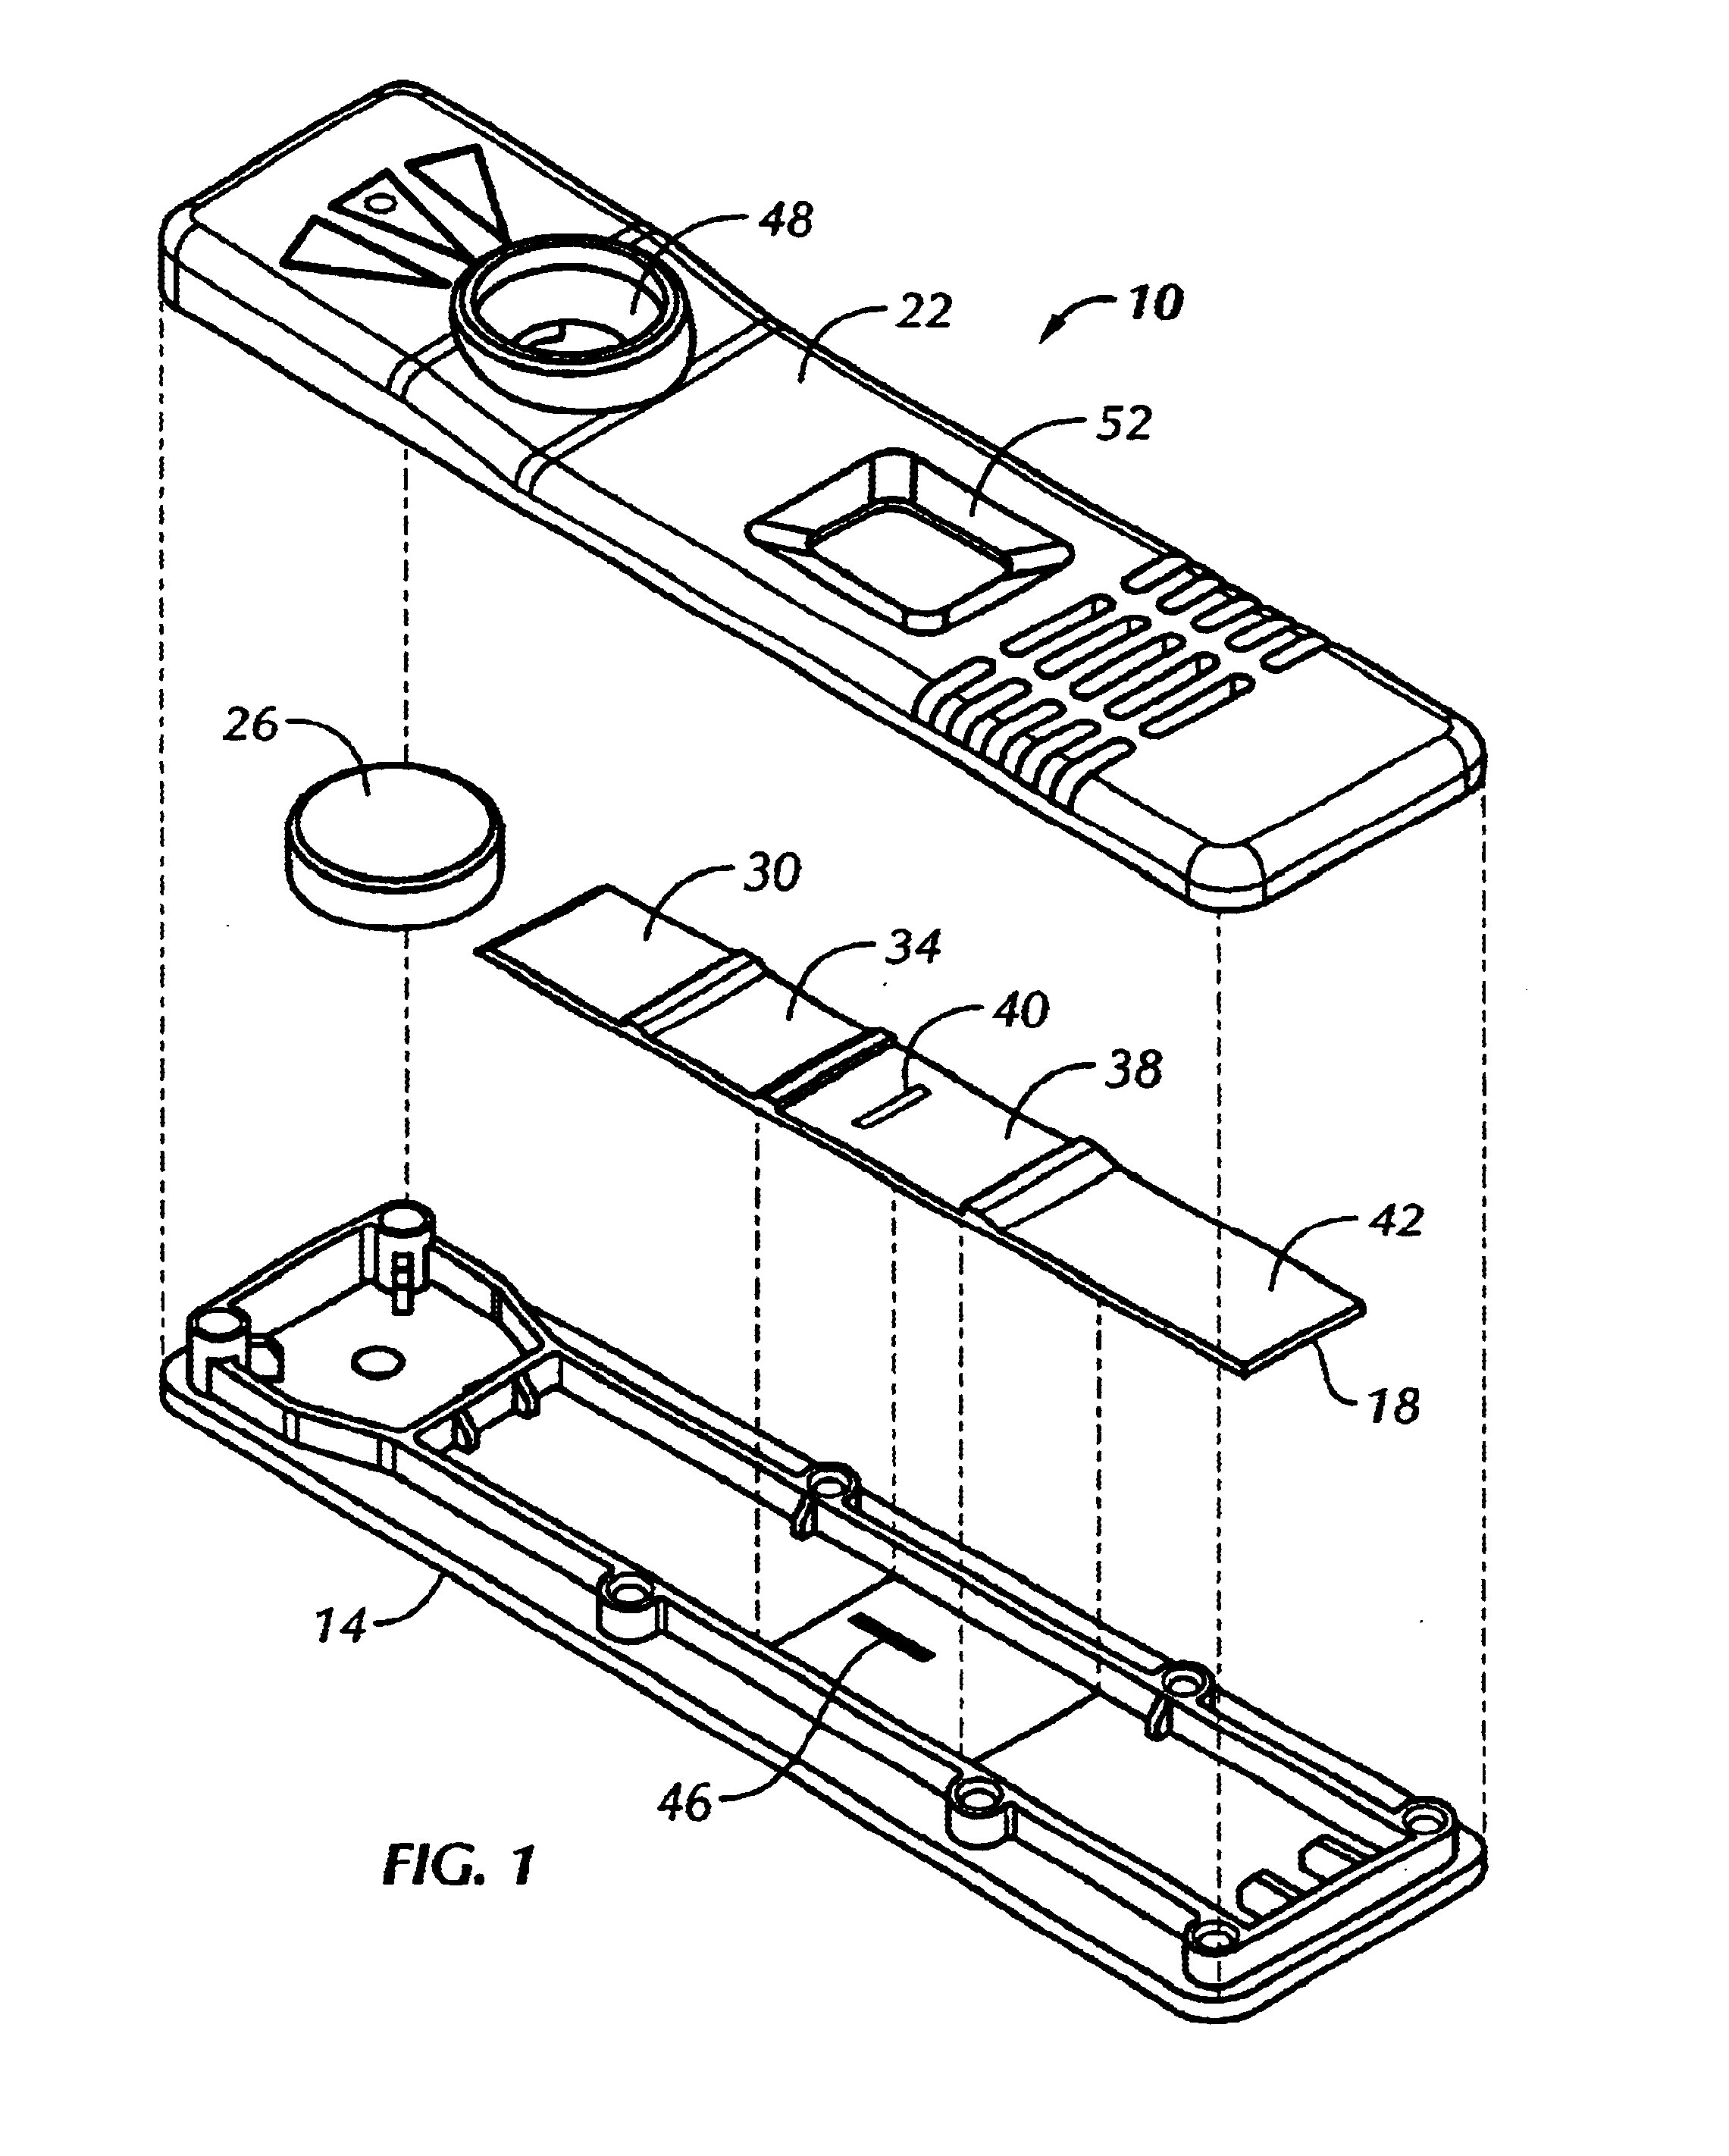 Method for adding an apparent non-signal line to a lateral flow assay